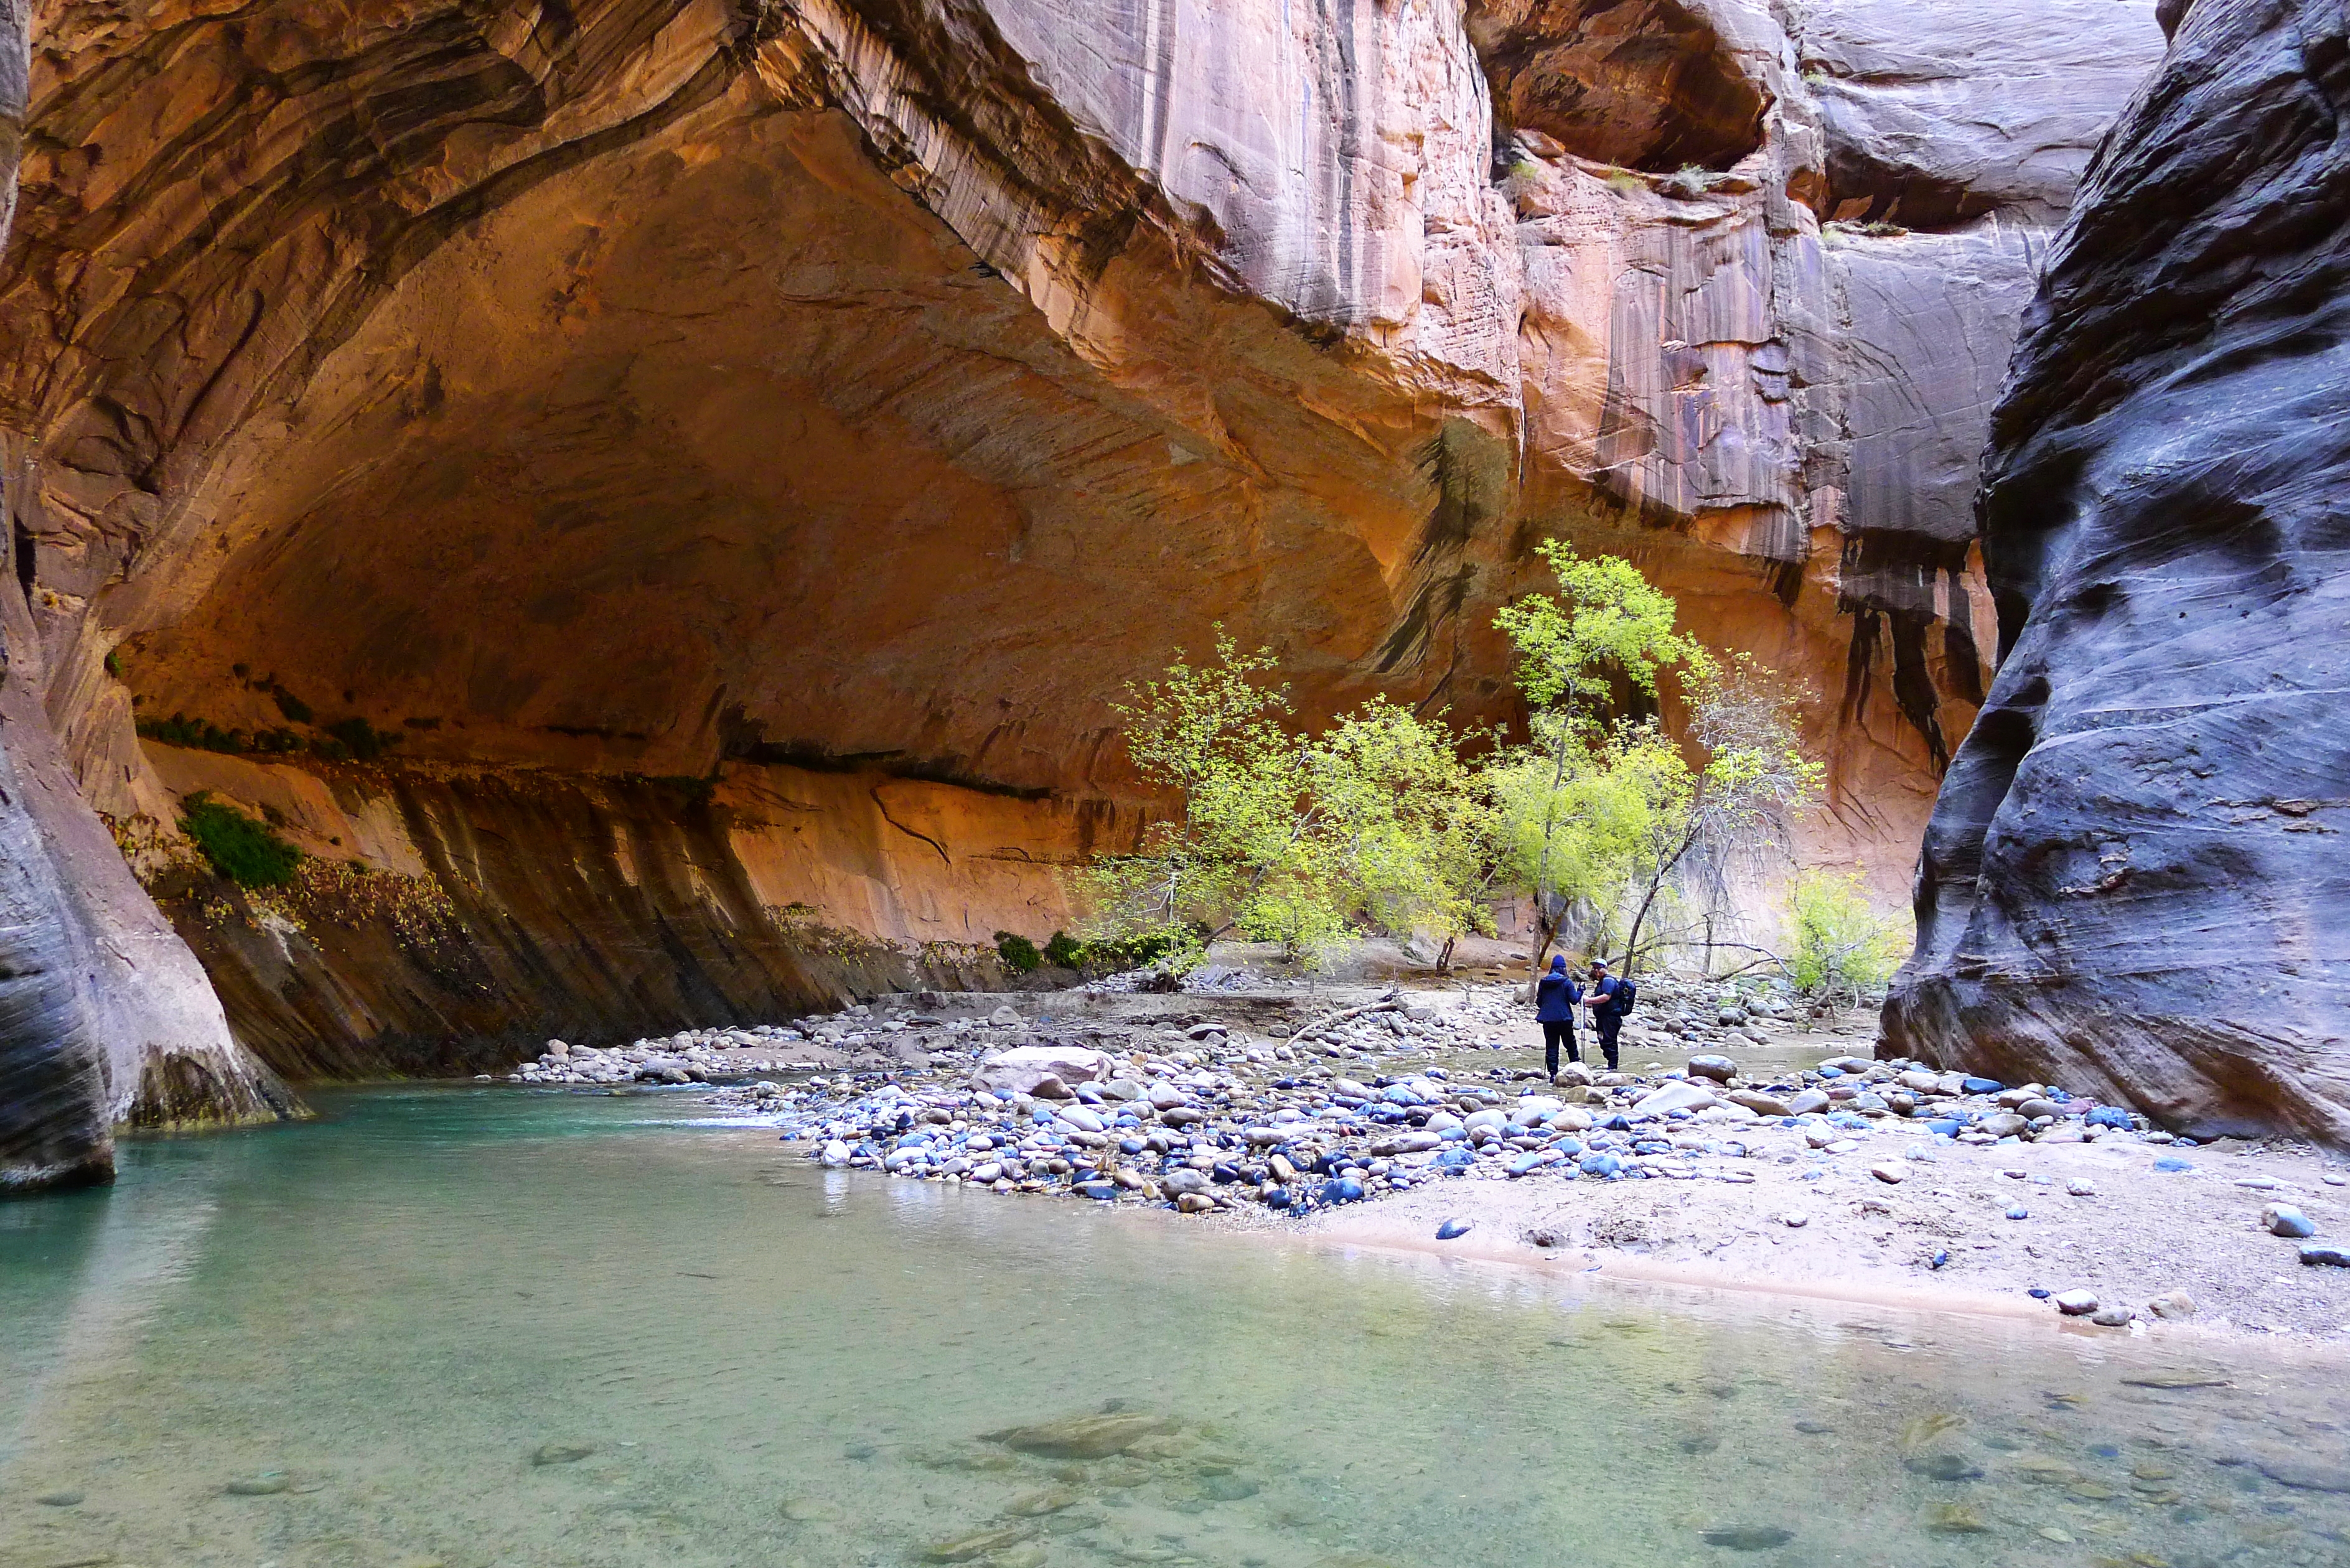 The Narrows in Zion aren't always a tight squeeze